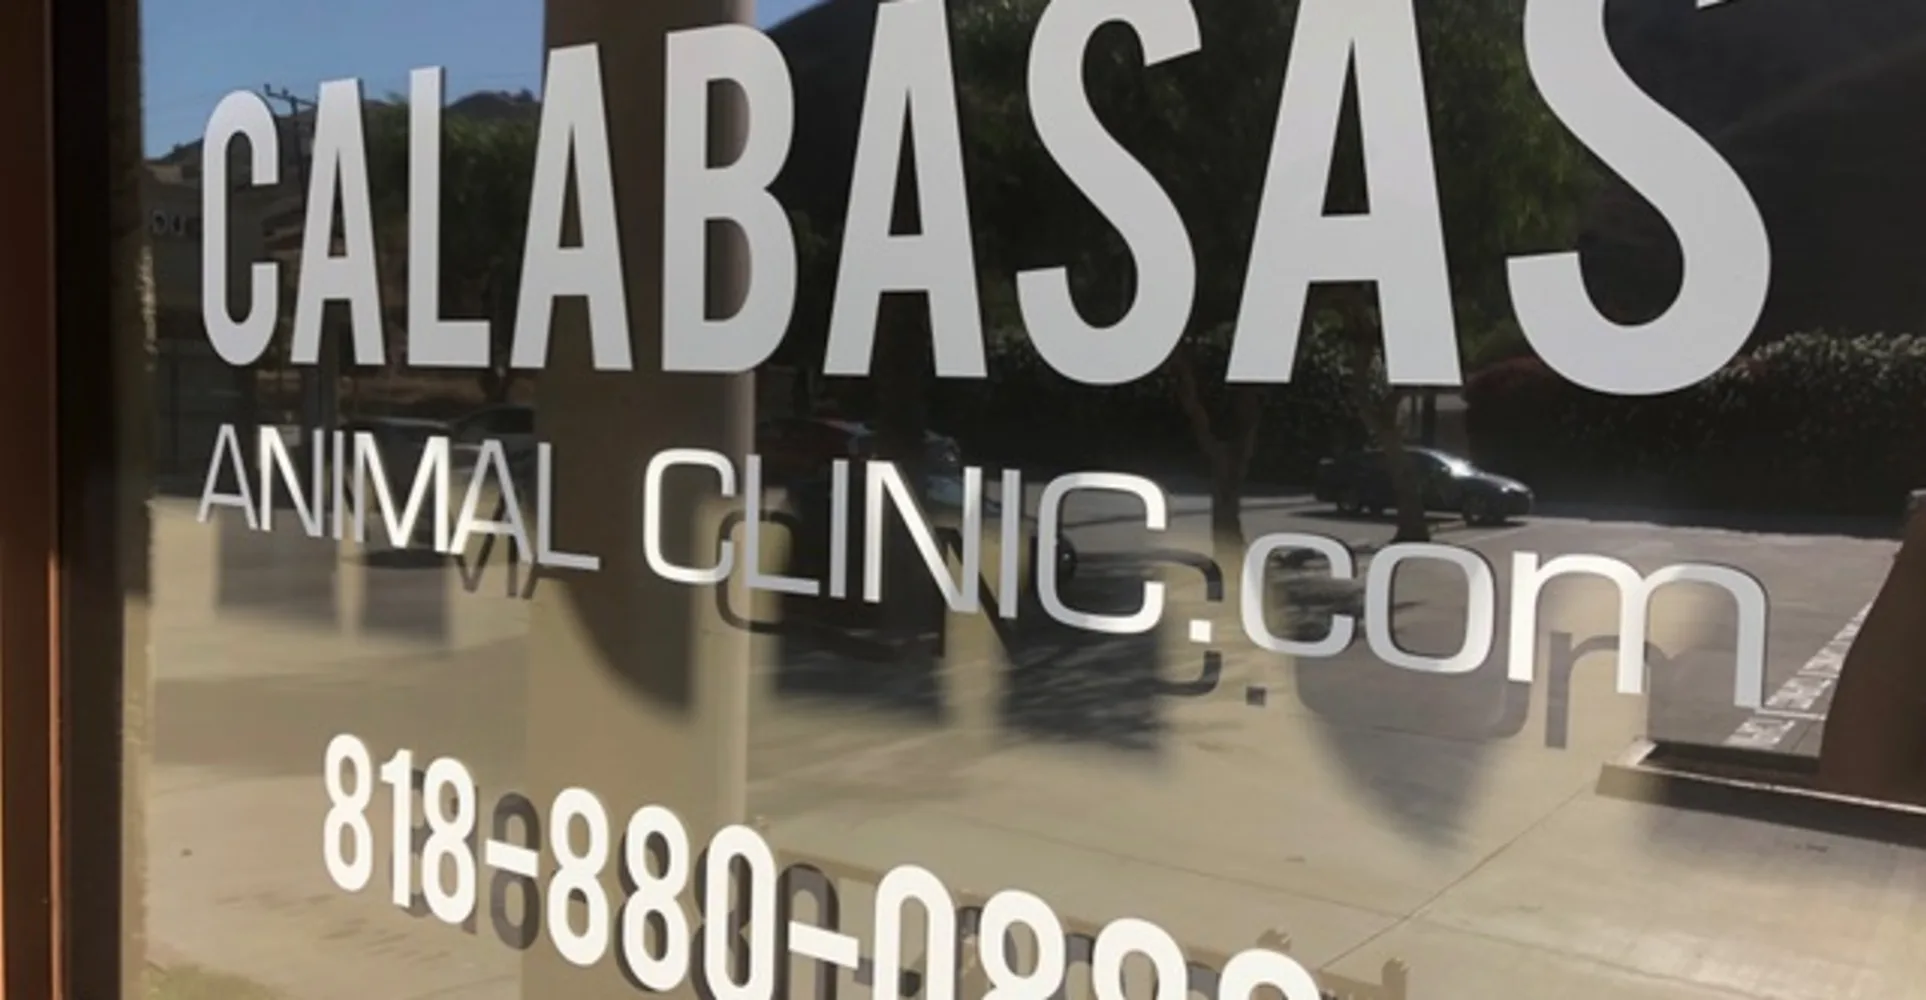 Calabasas Animal Clinic Sign that has their phone number 818-880-0888 and website url